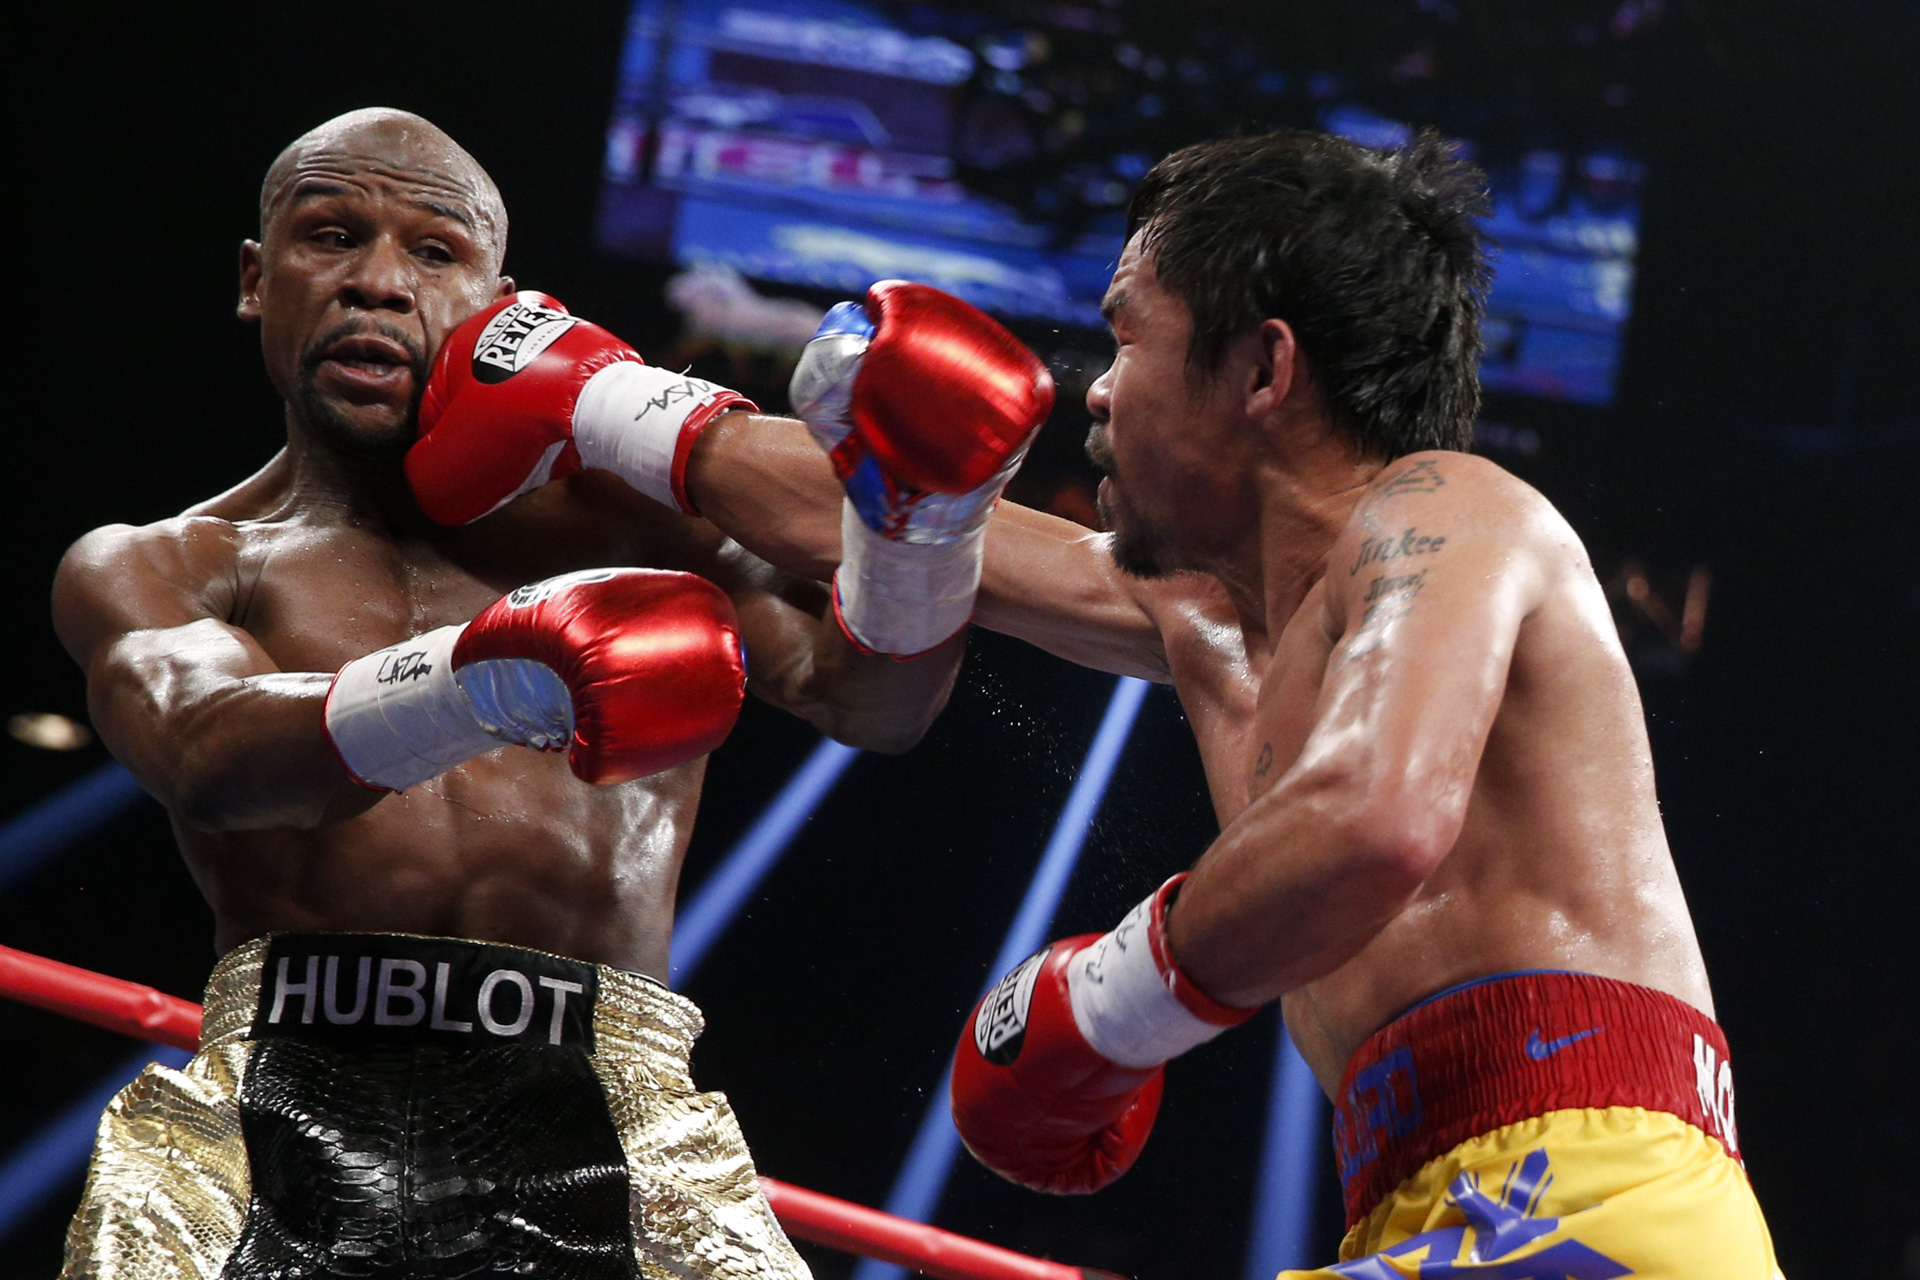 BOXING NEws: Coach Manny Pacquiao: "We would like to fight Mayweather again"